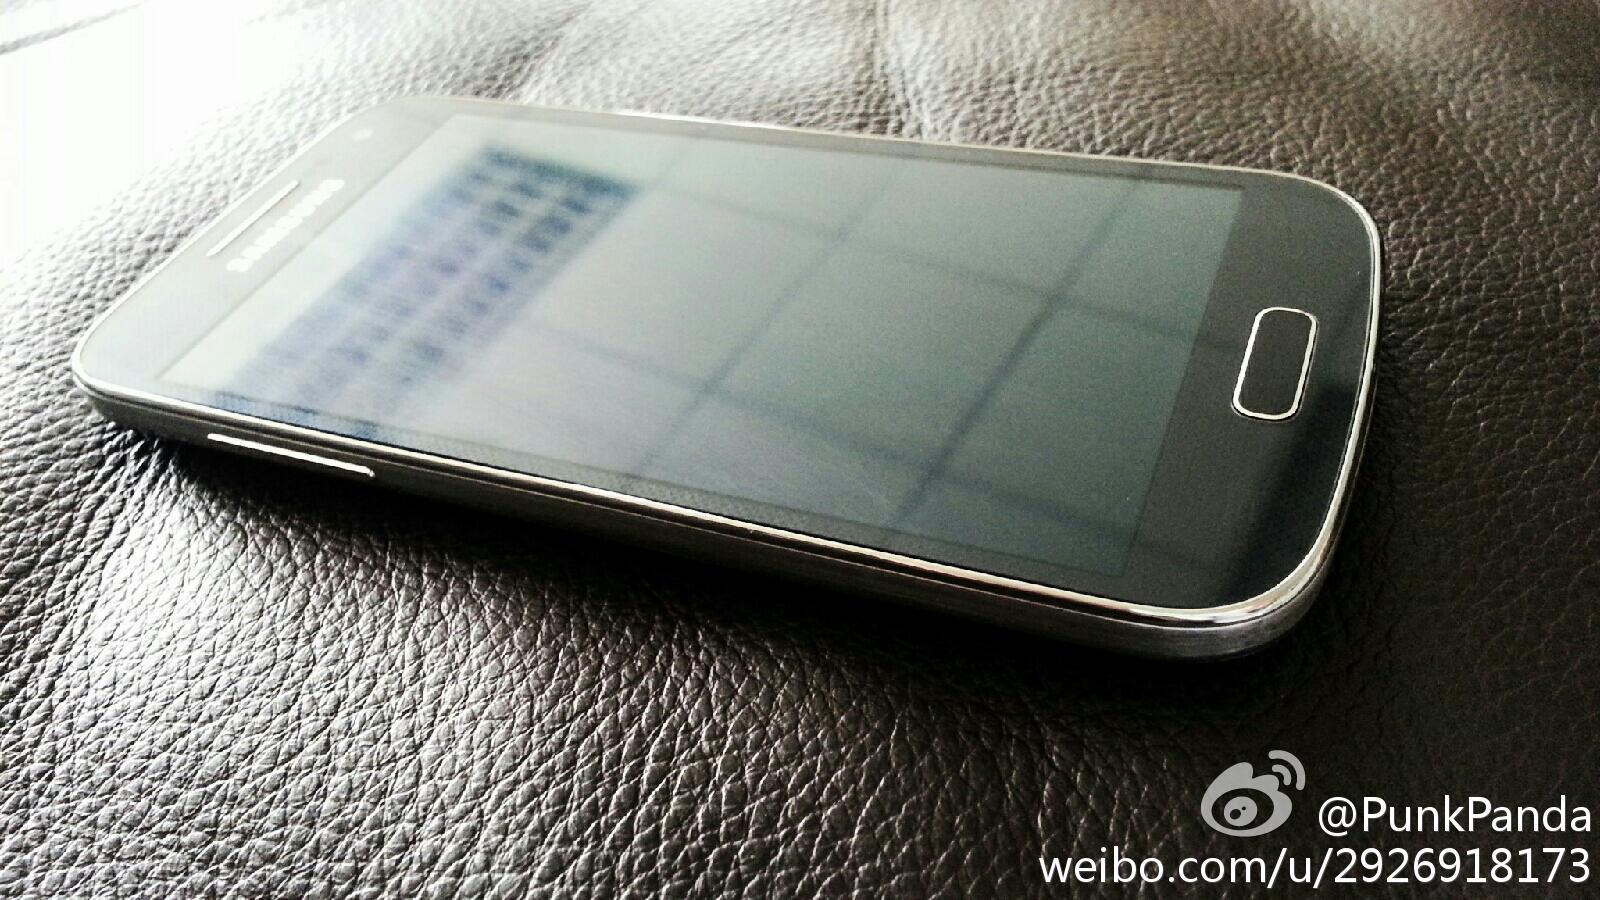 Samsung-Galaxy-S4-mini-leaks-out-in-perfect-clarity (4)